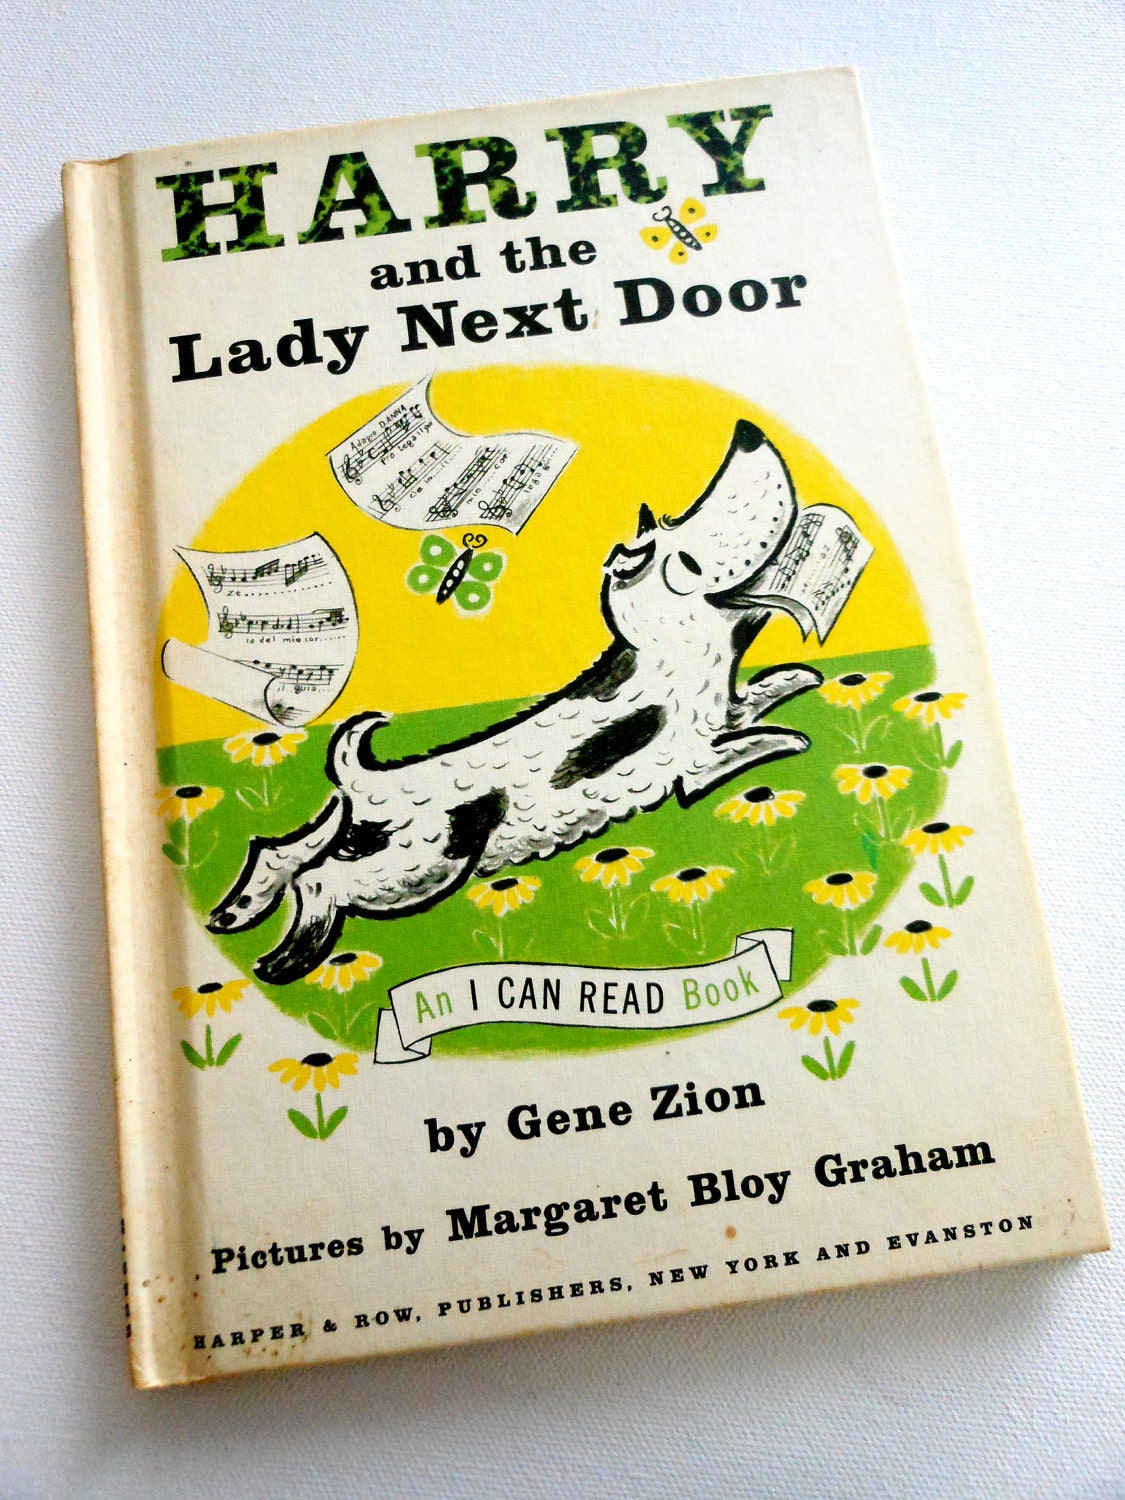 vintage-harry-and-the-lady-next-door-childrens-by-rarebirdboutique